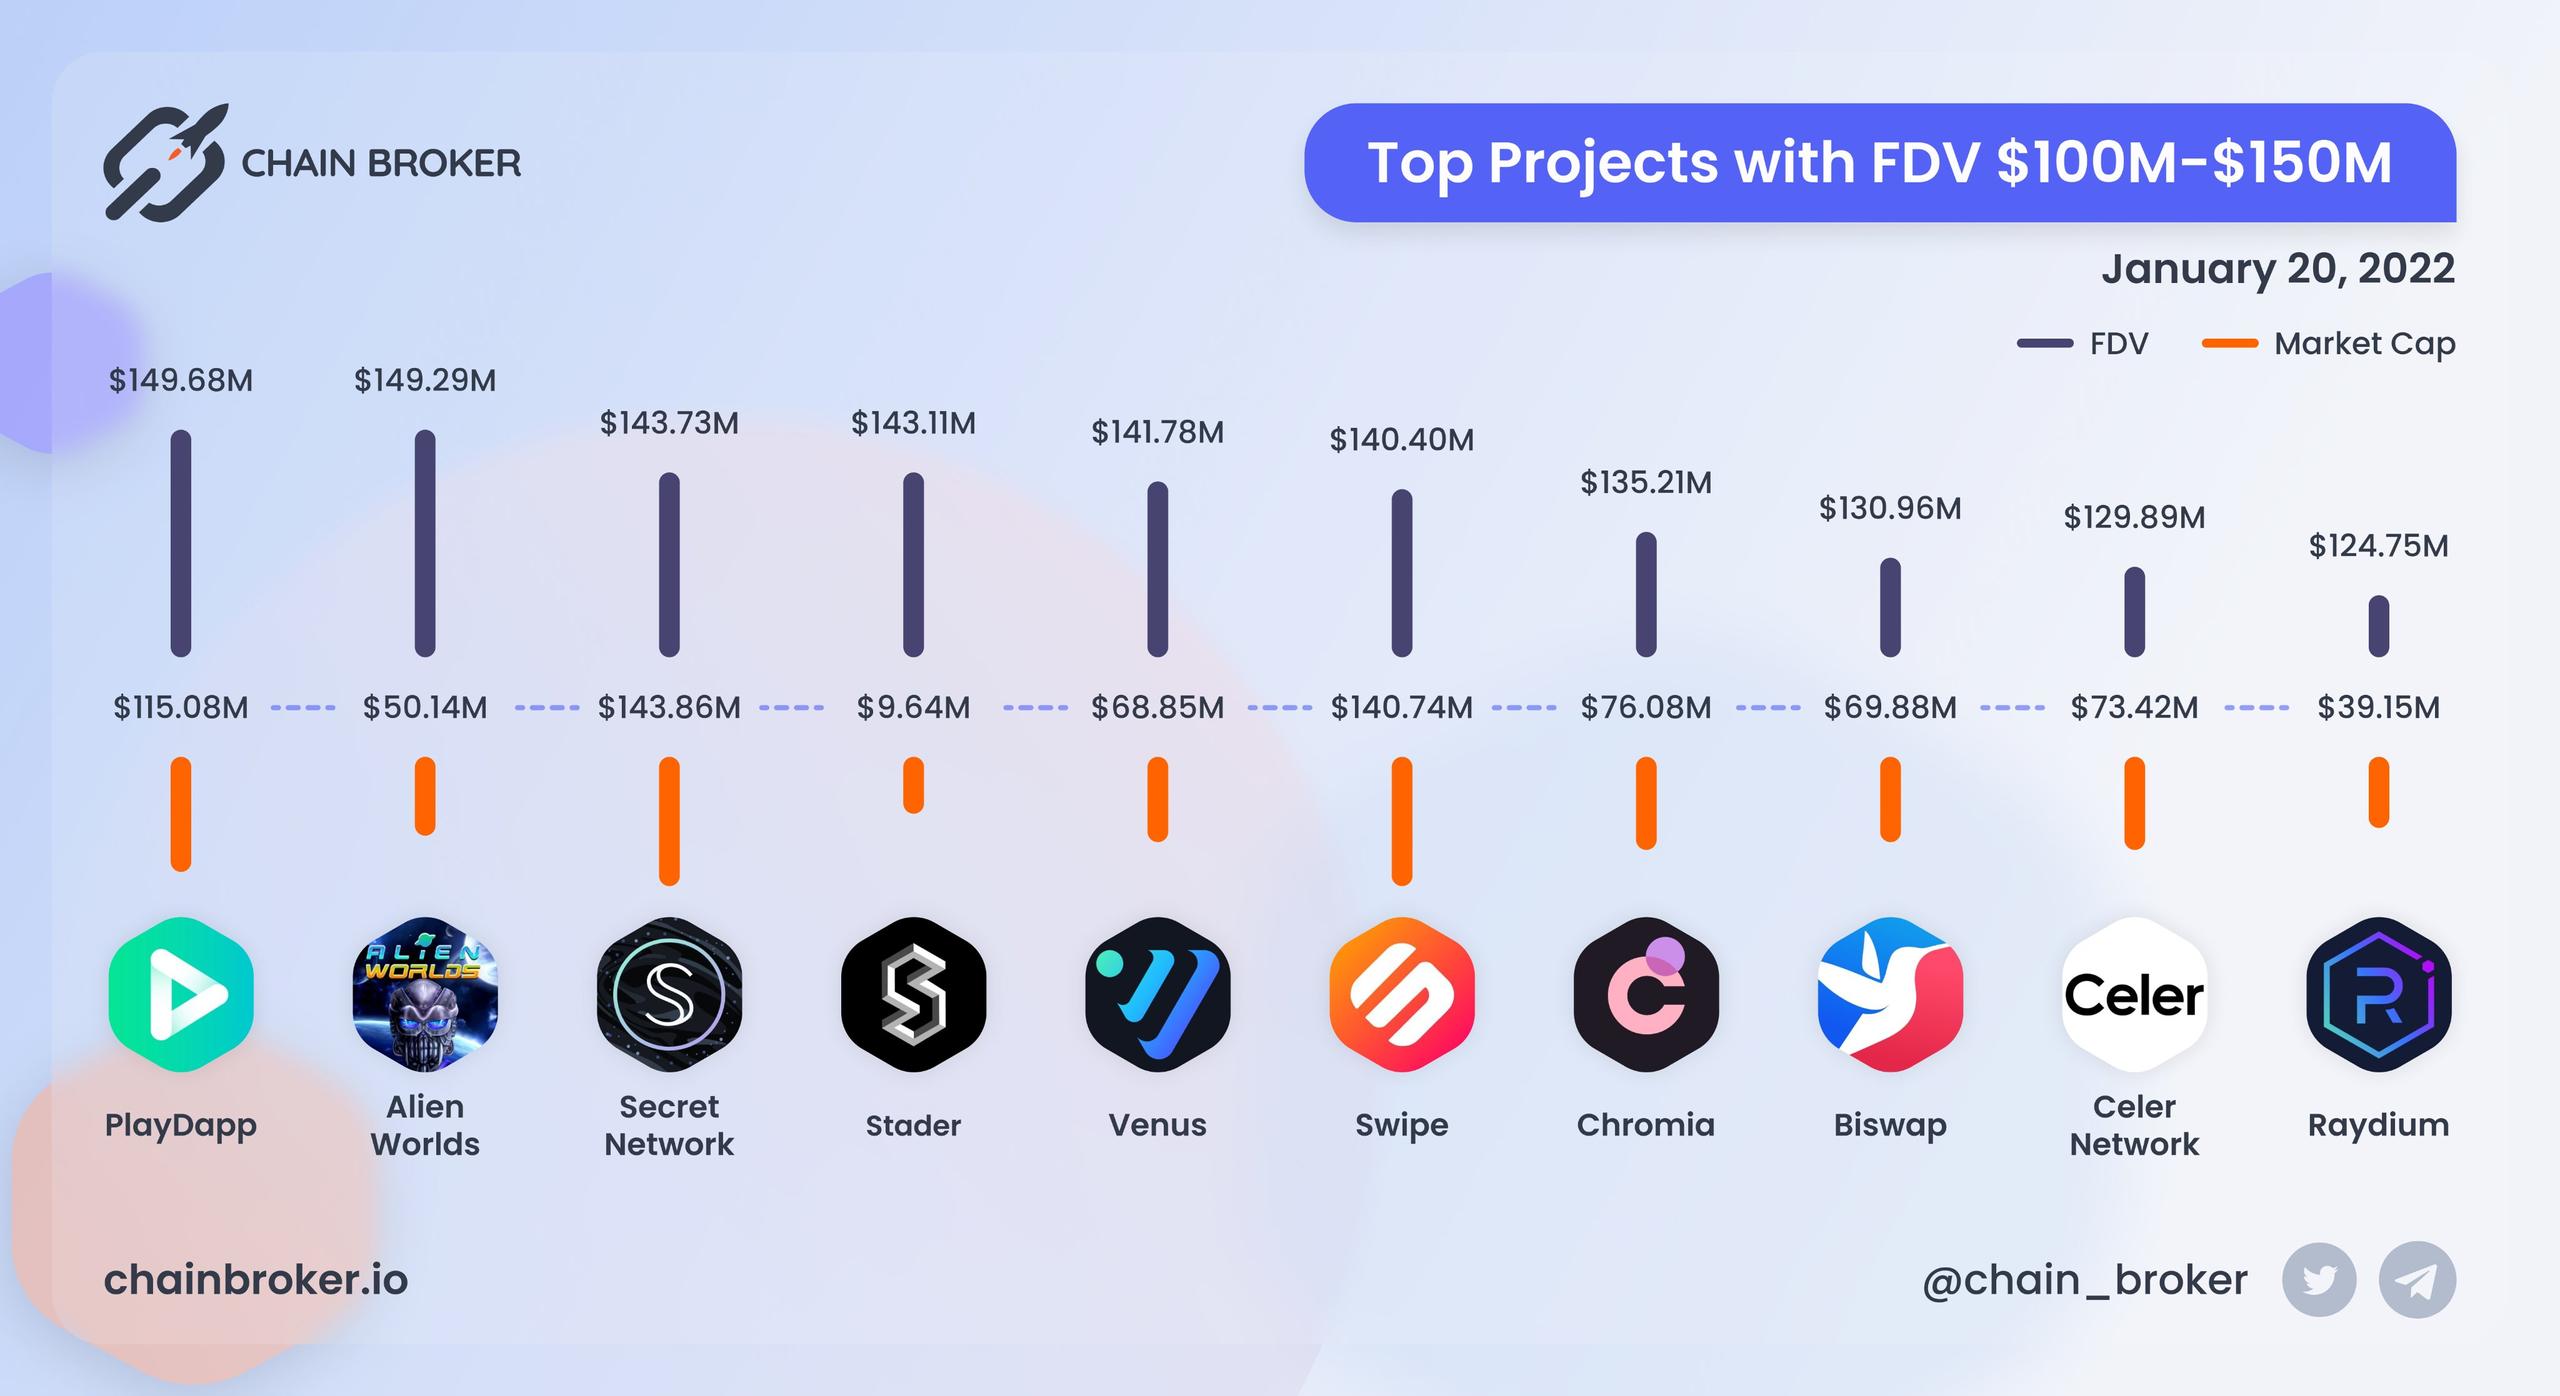 Top projects with FDV $100M - $150M